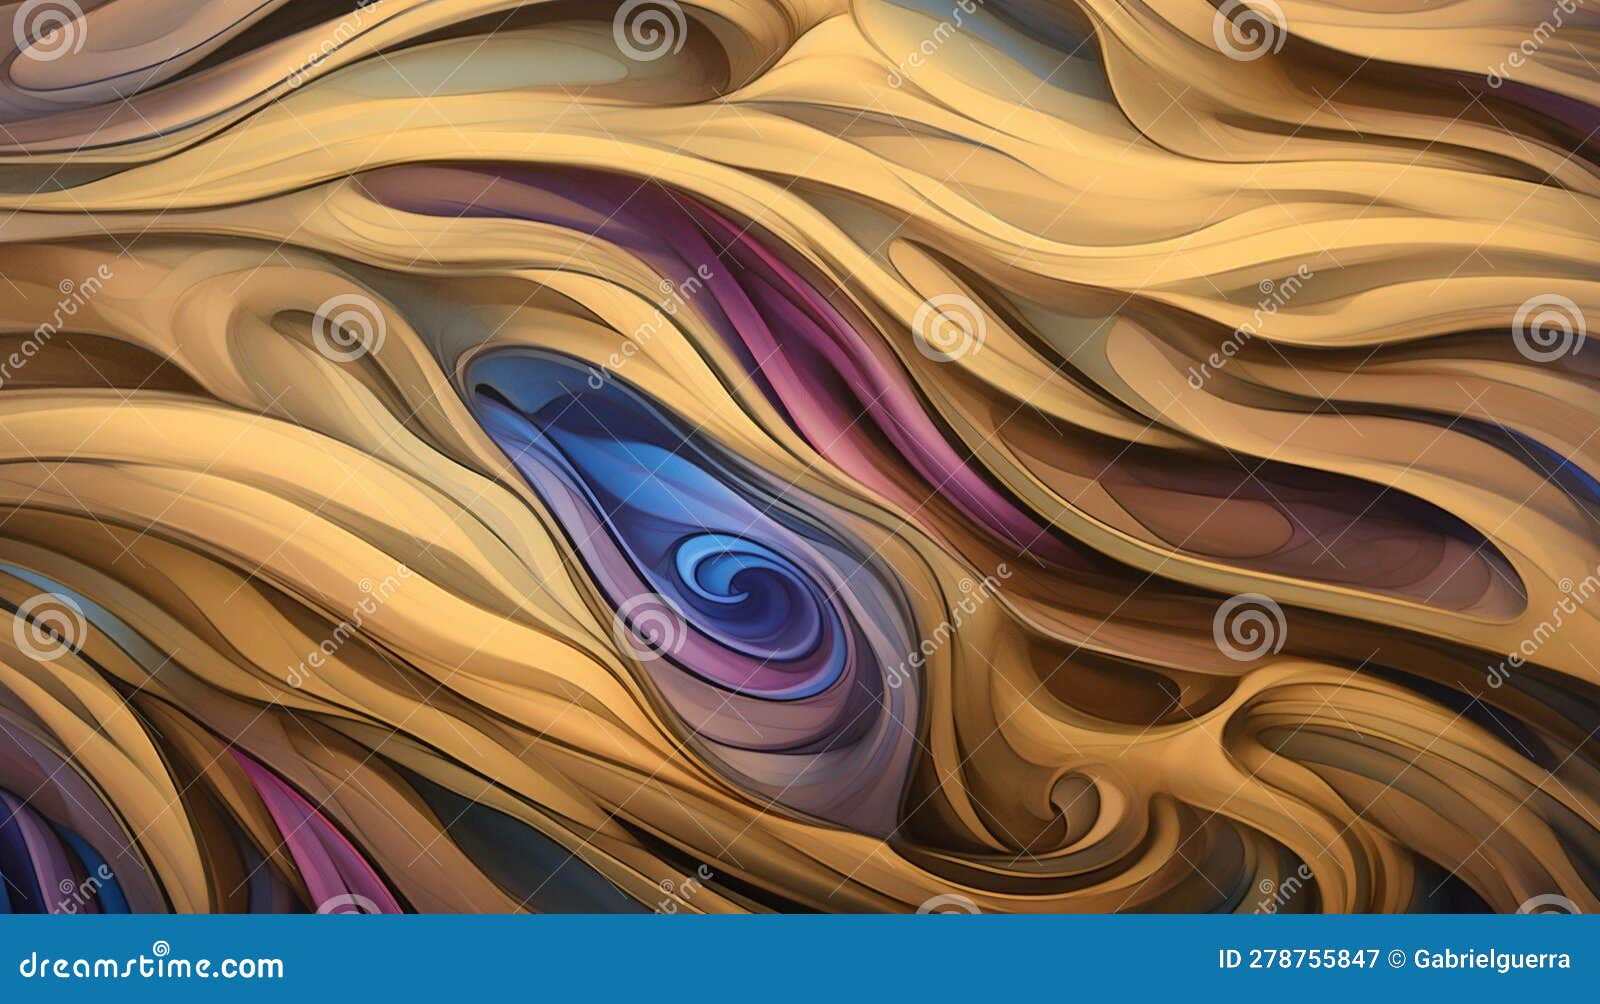 dimensional portal. beautiful abstract yellow painting with colorful waves. dynamic forms. chaotic background.